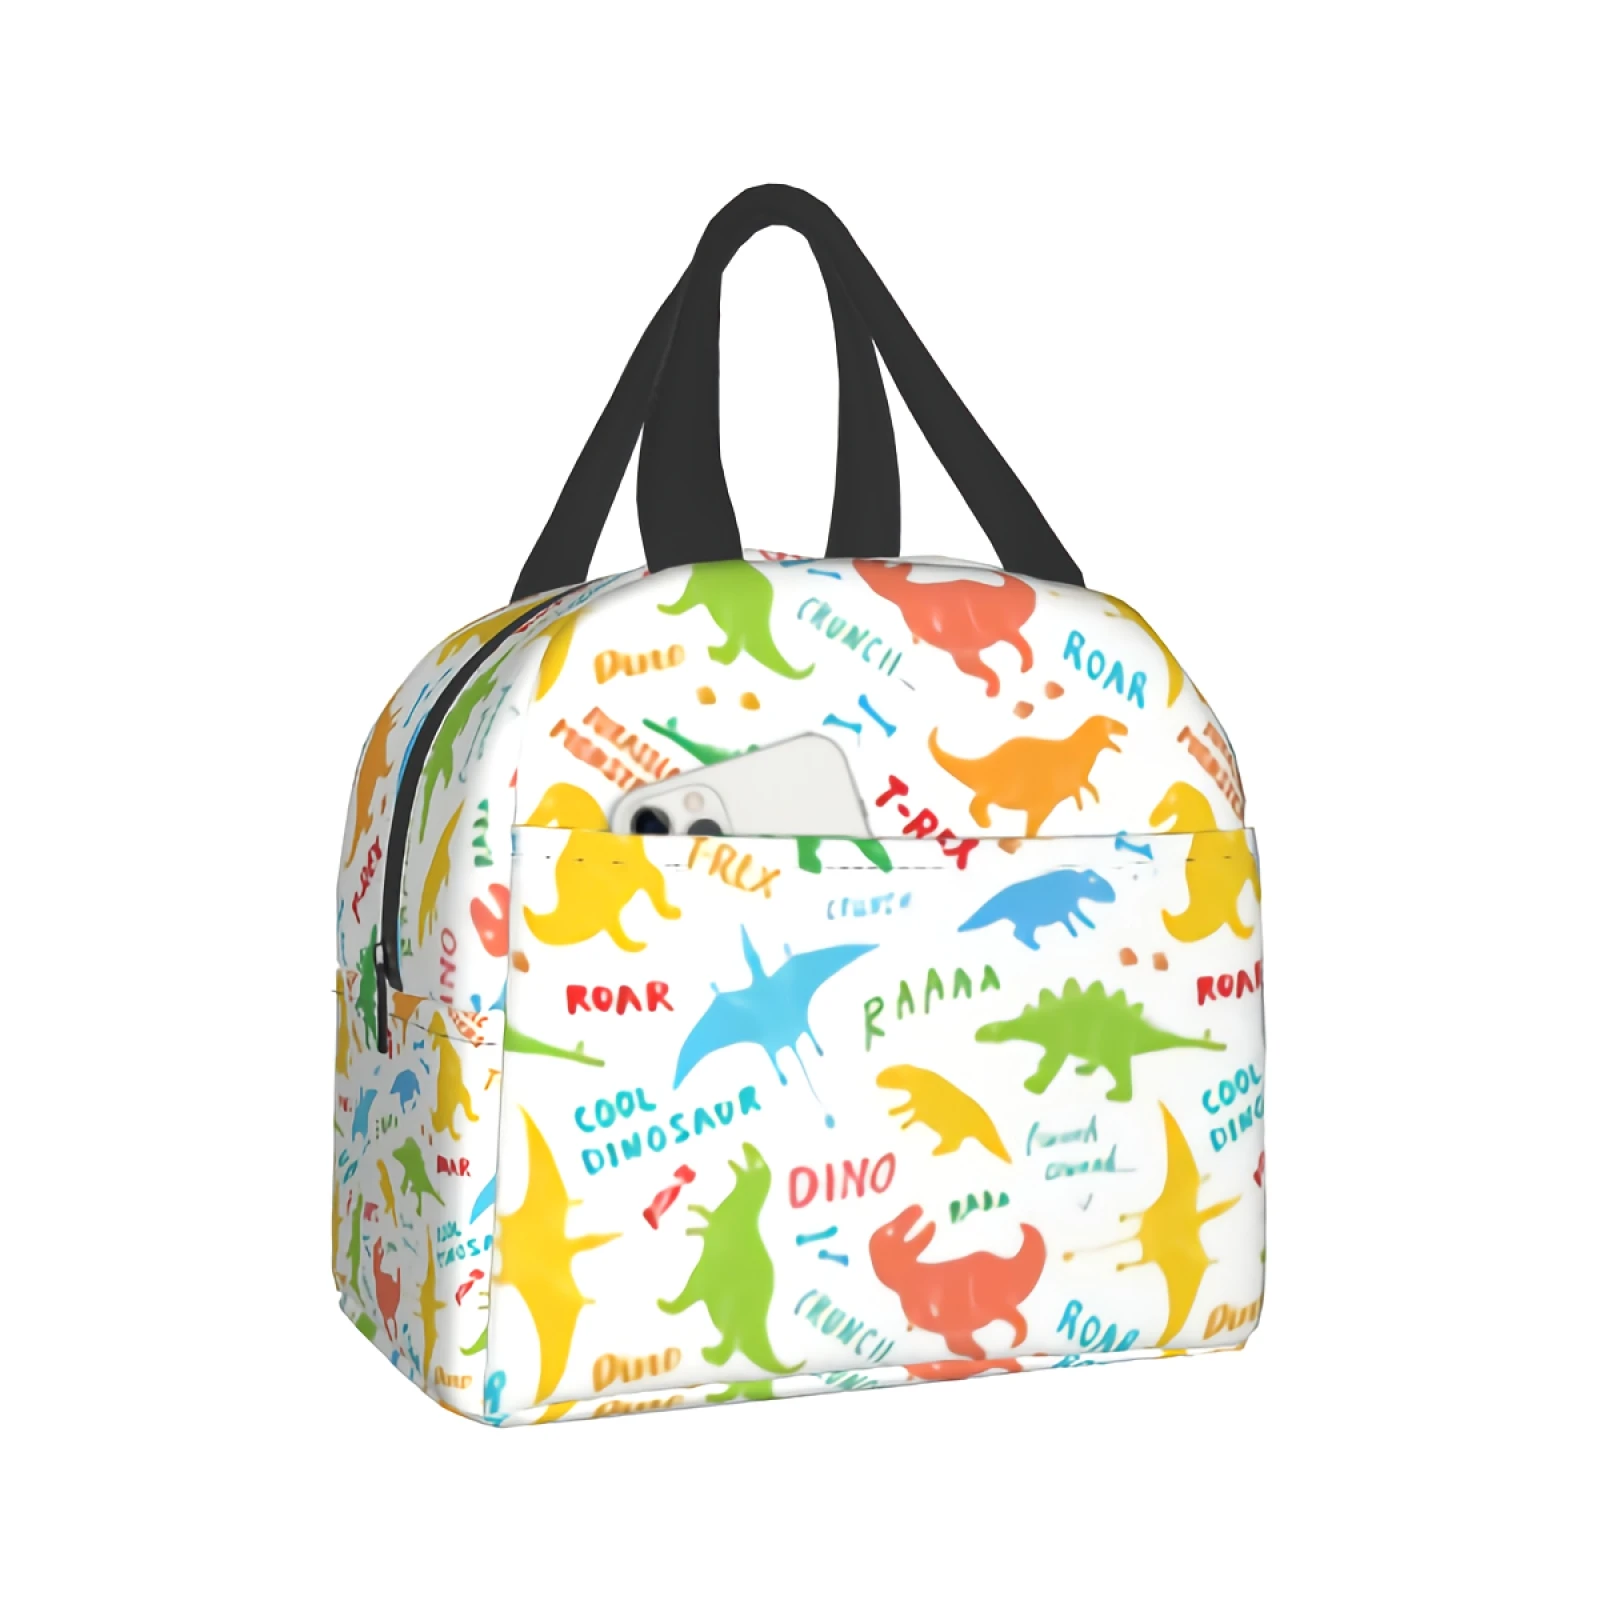 

Colorful Dinosaurs Doodles Portable Insulated Lunch Tote Bag Waterproof for Men Women Kids Cute Cartoon Dino Animal Pattern